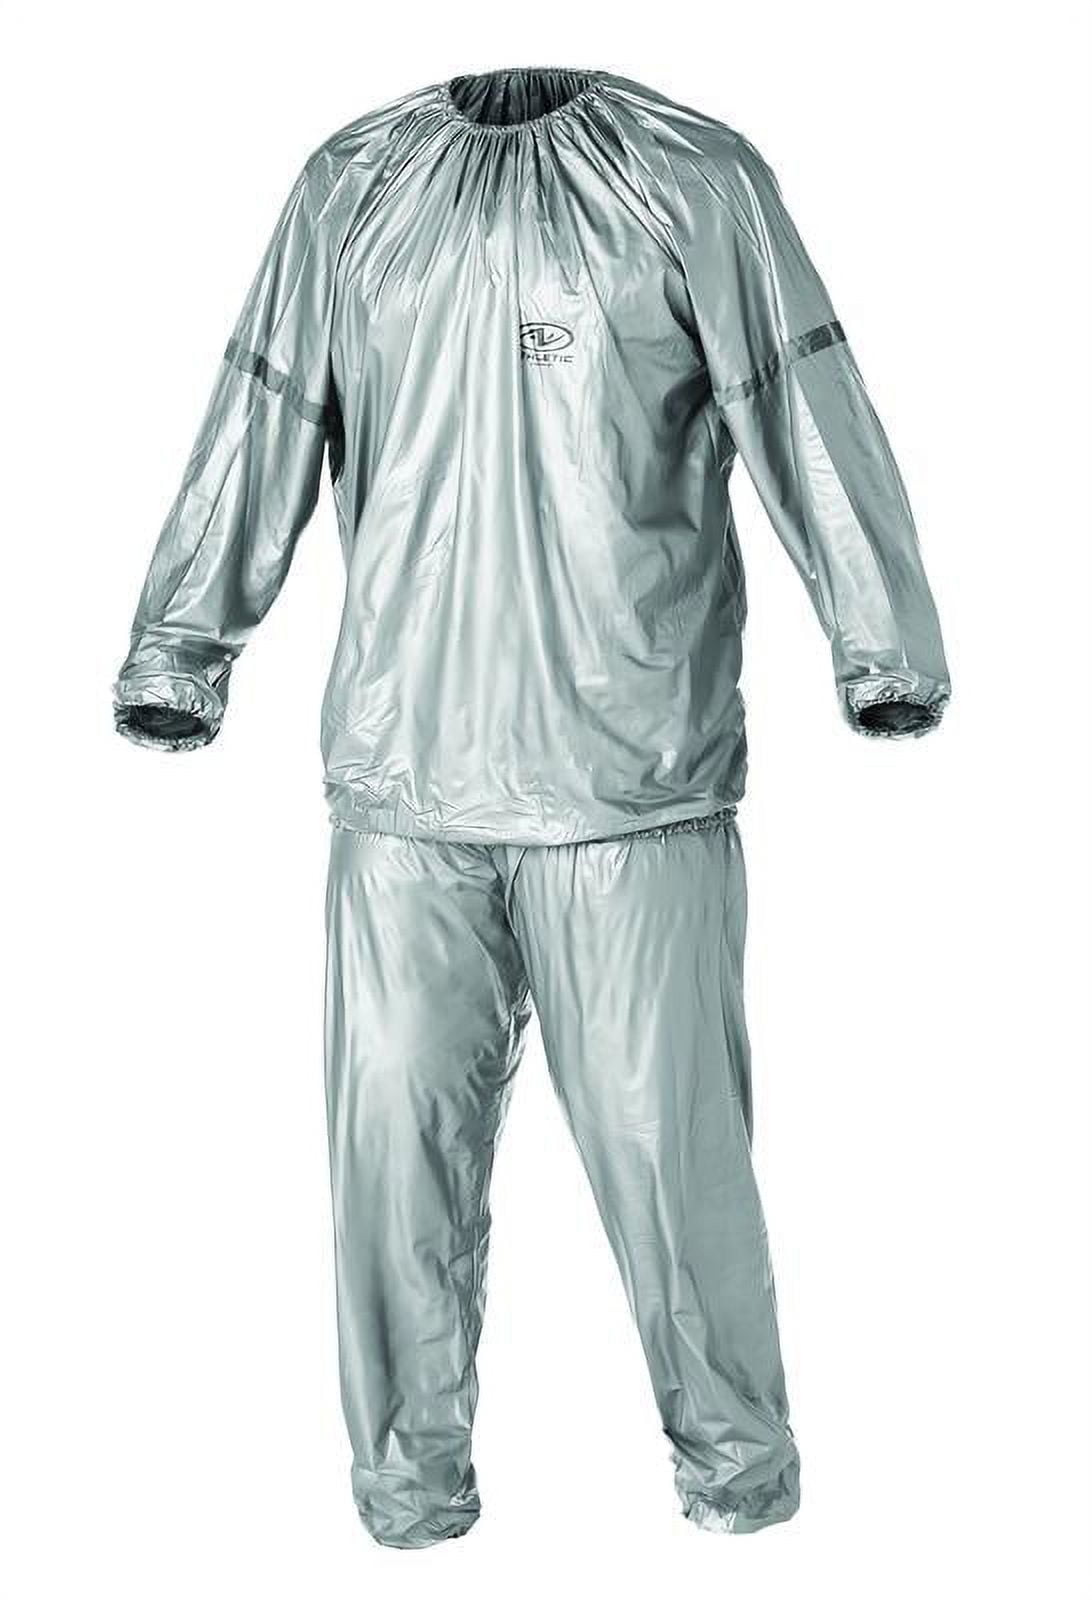 Athletic Works Sauna Suit with Reflective Detailing on Sleeves,  Large/X-Large, Silver